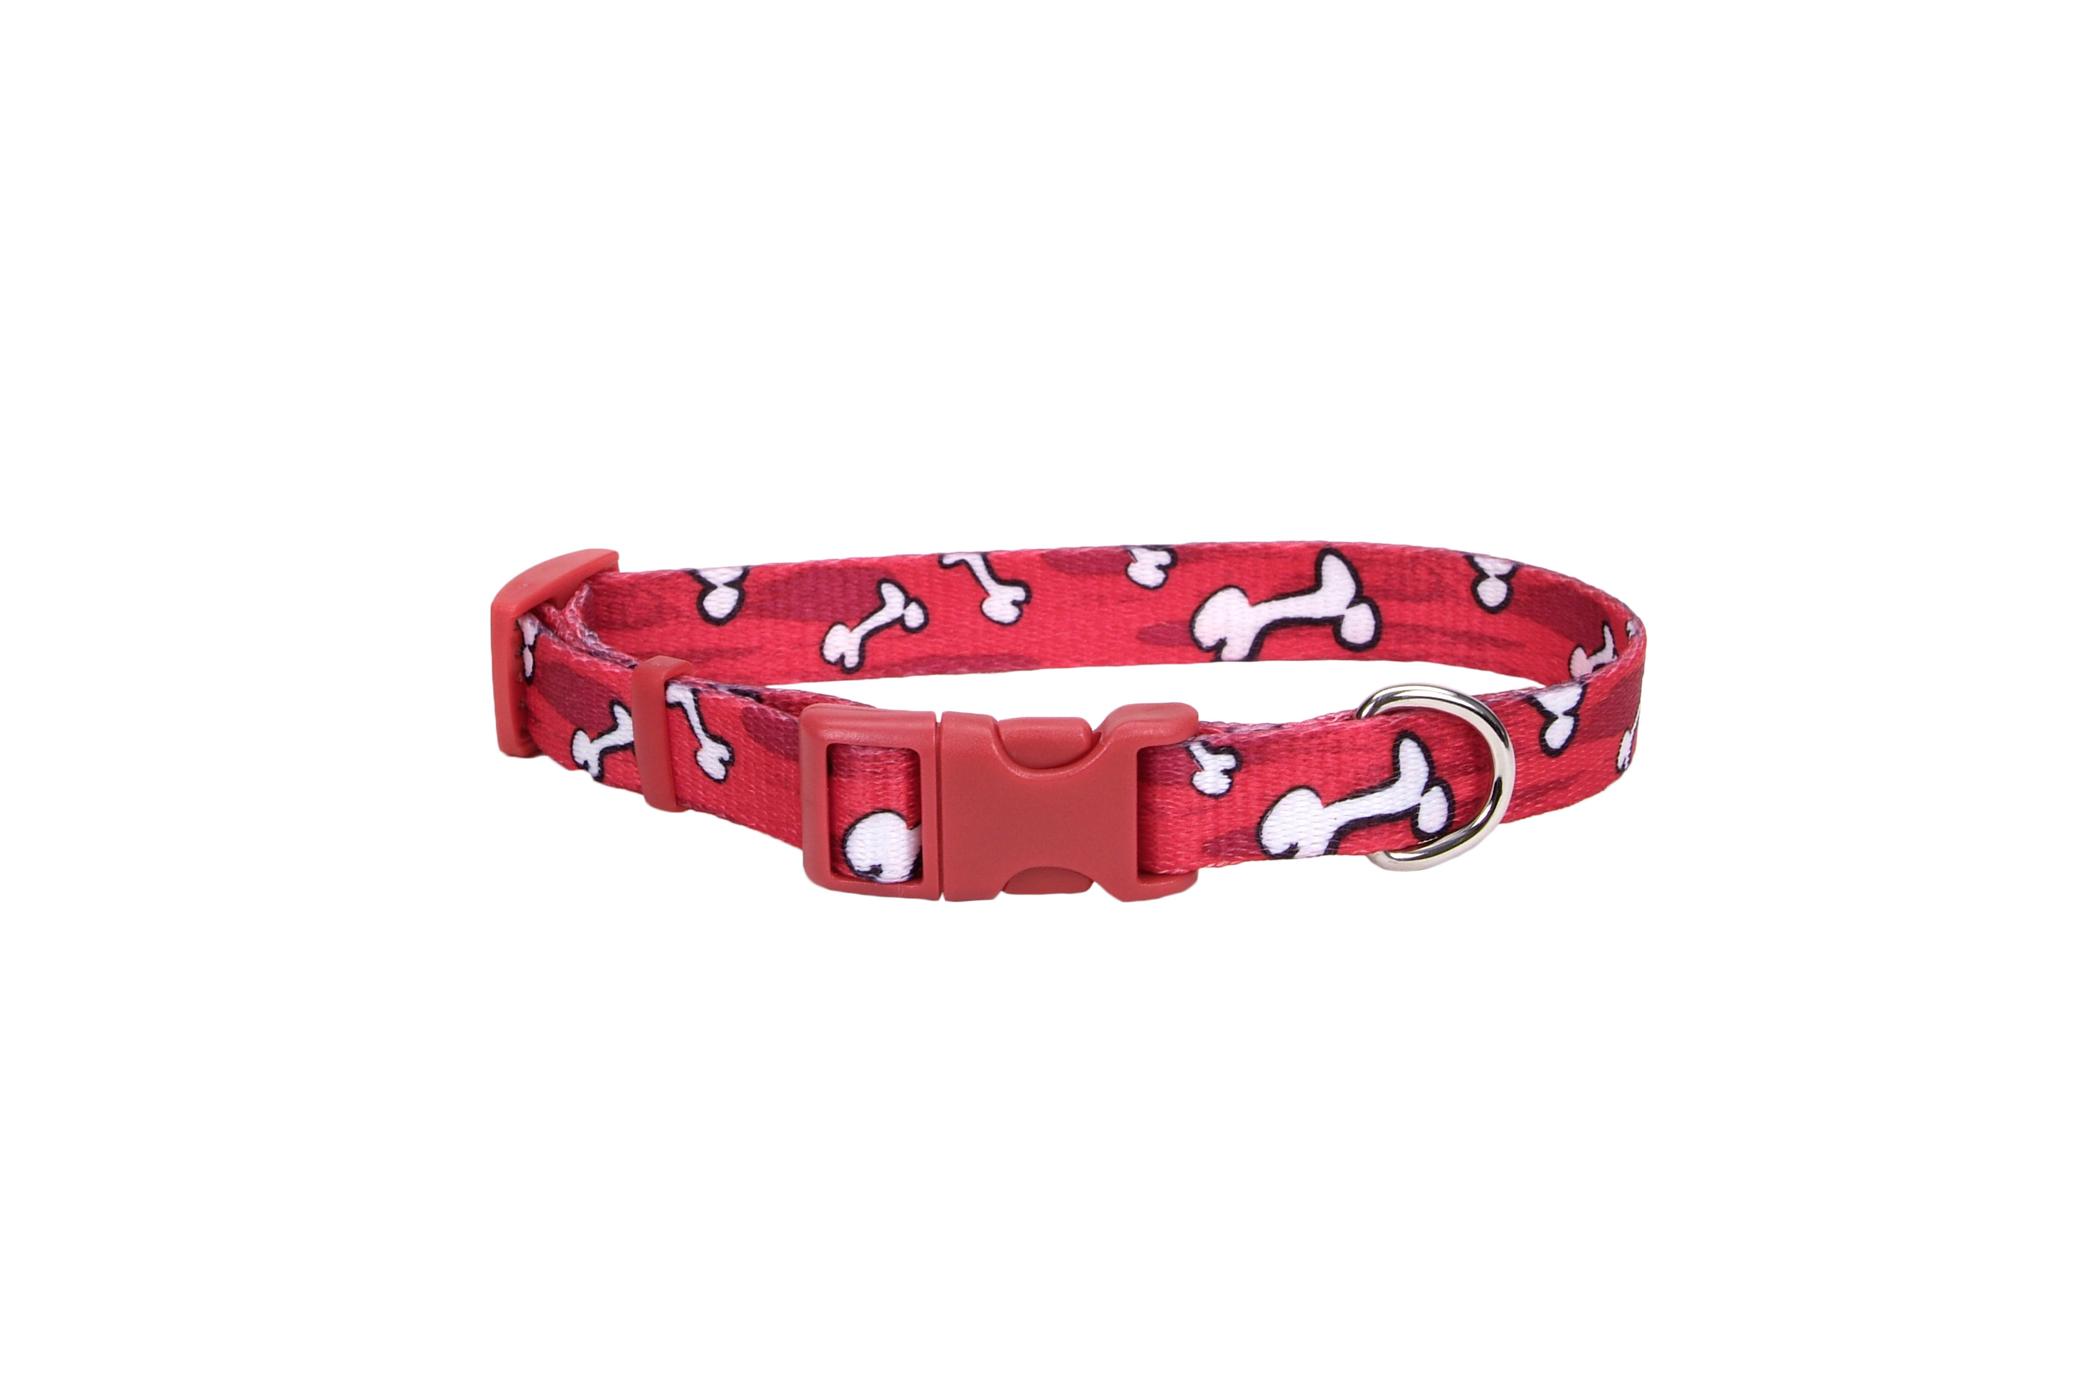 Alliance 10-14" Red with Bone Print Adjustable Small Dog Collar; image 2 of 2